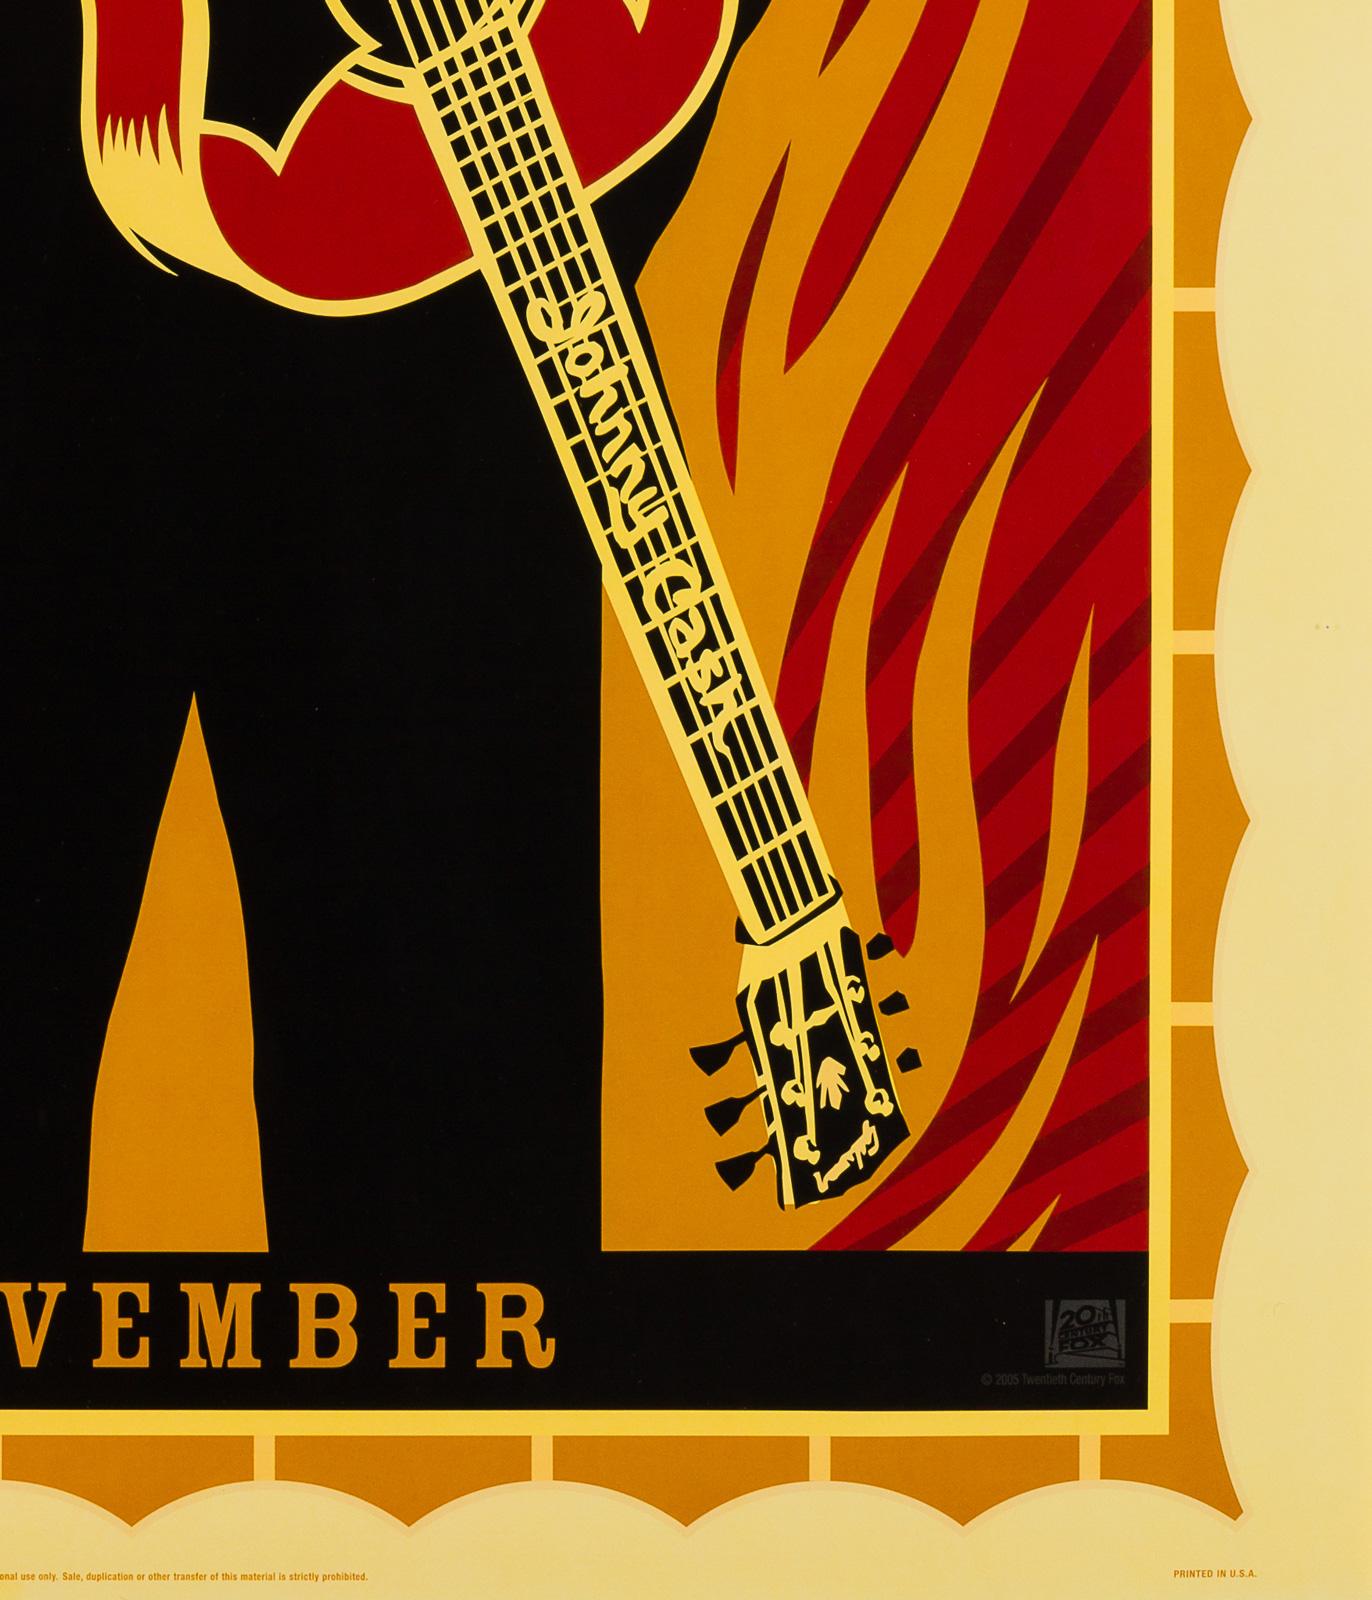 We adore the design on the US 1 sheet advance (double-sided) film poster by contemporary American artist Shepard Fairey for Johnny Cash biopic “Walk the Line”. One of the few relatively recent film posters worth adding to your collection.

This